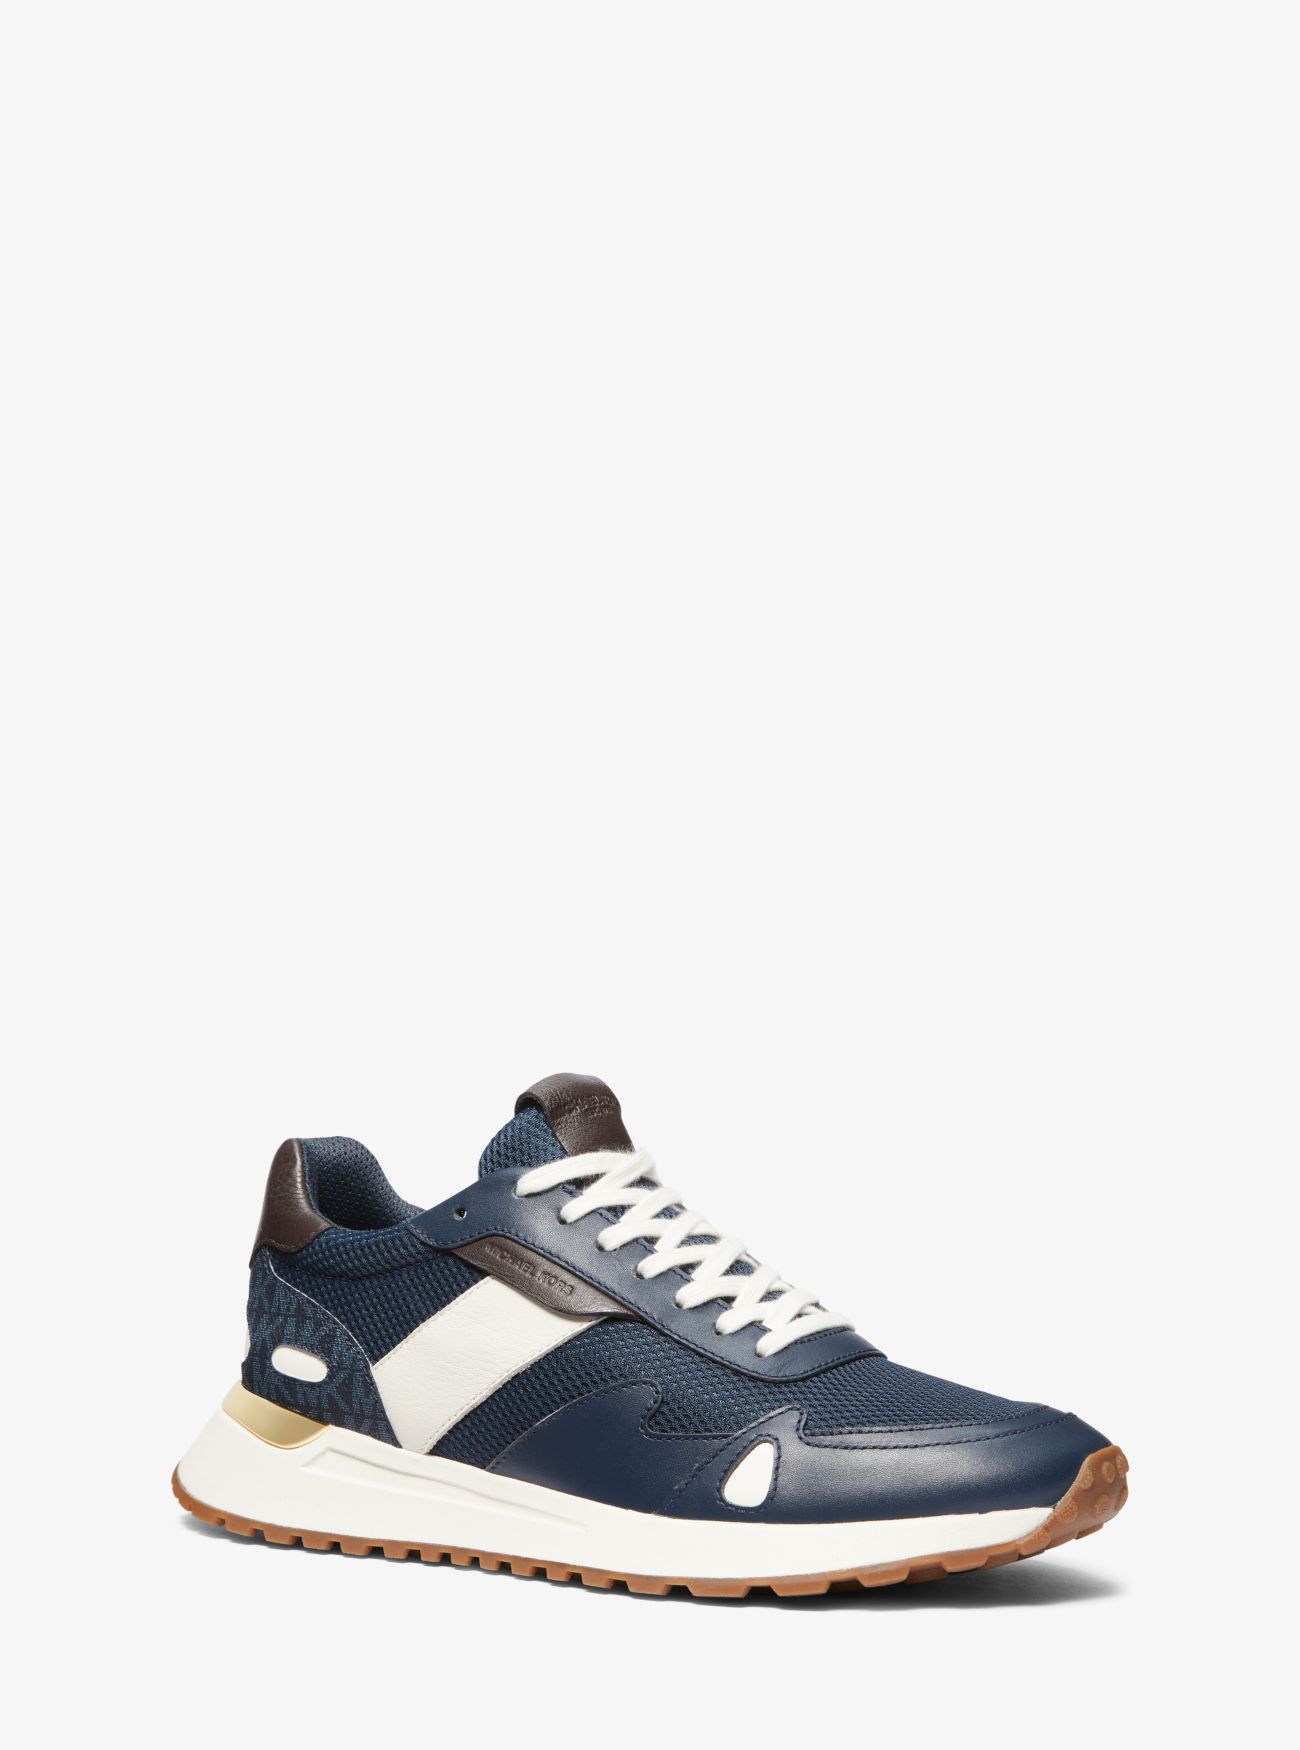 MK Miles Leather and Mesh Trainer - Blue - Michael Kors